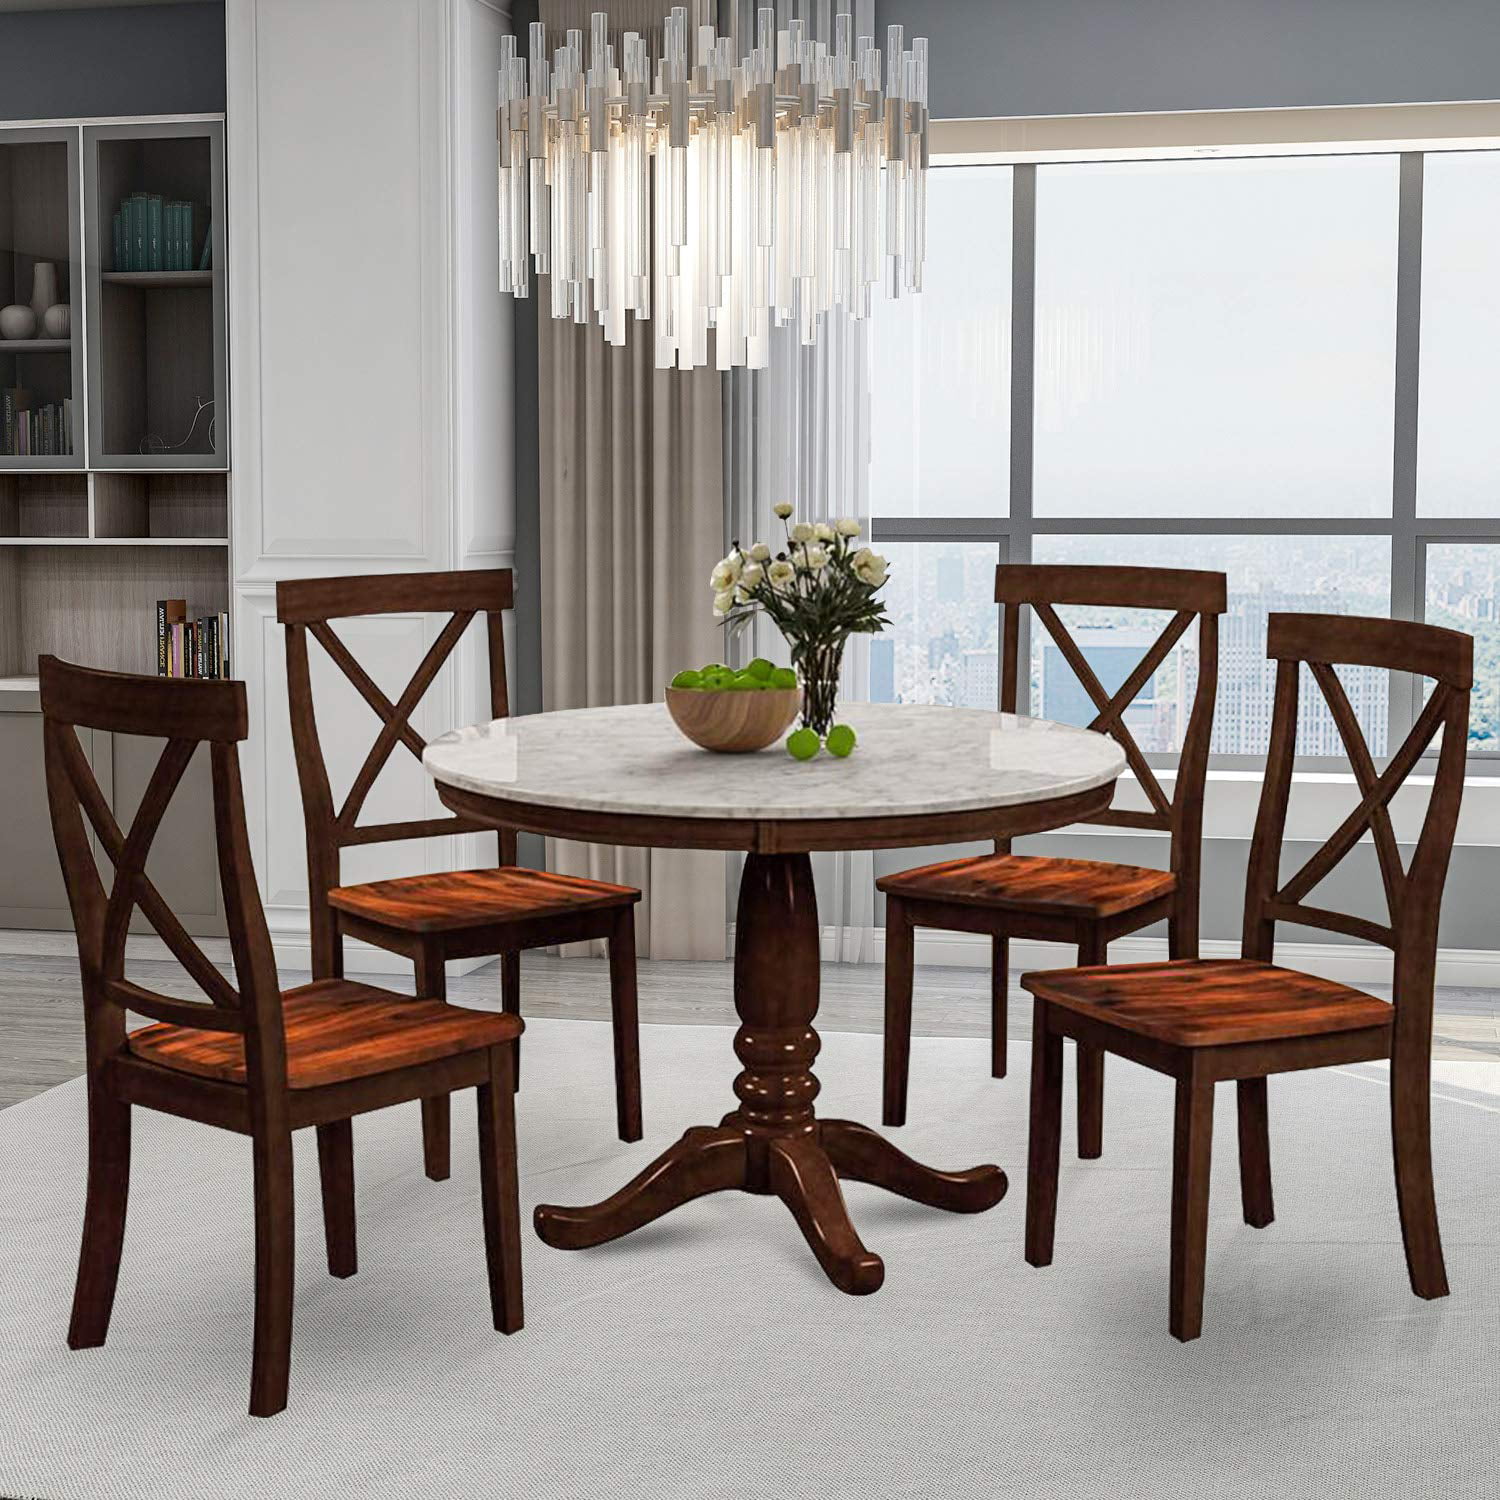 Round Dining Table And Chair Set, Round Dining Table Set Marble Top